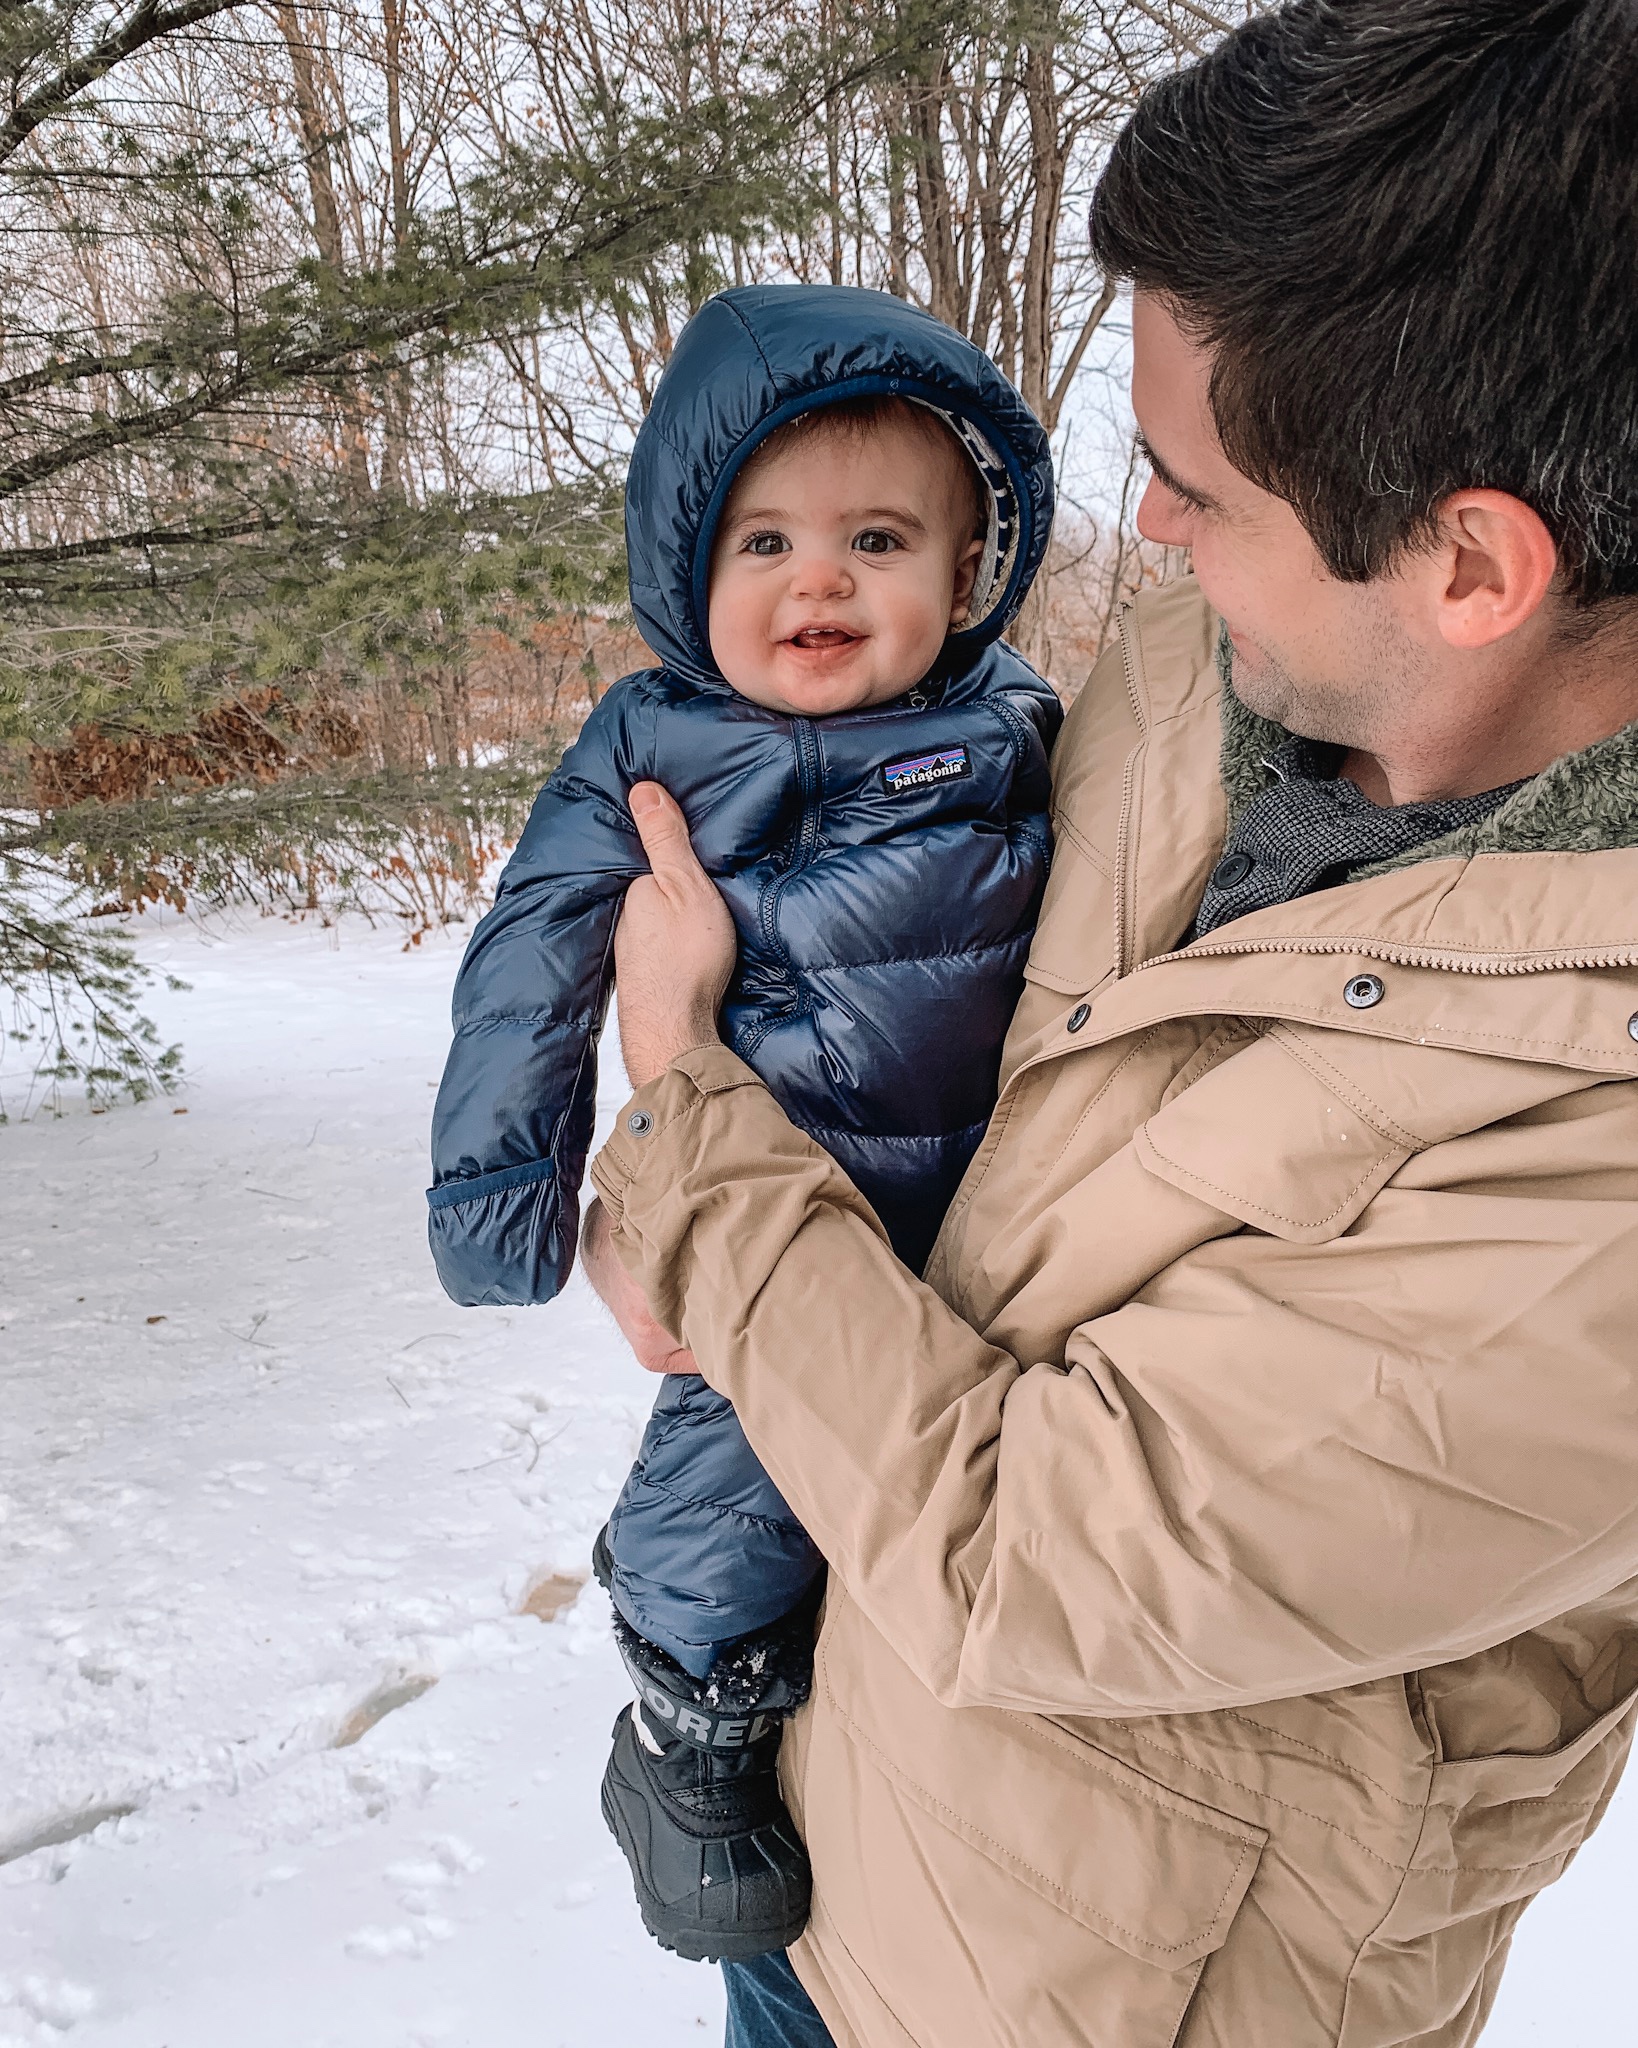 winter wear for family, gift guide, baby snowsuit, Patagonia, Sorel boots toddler, backcountry